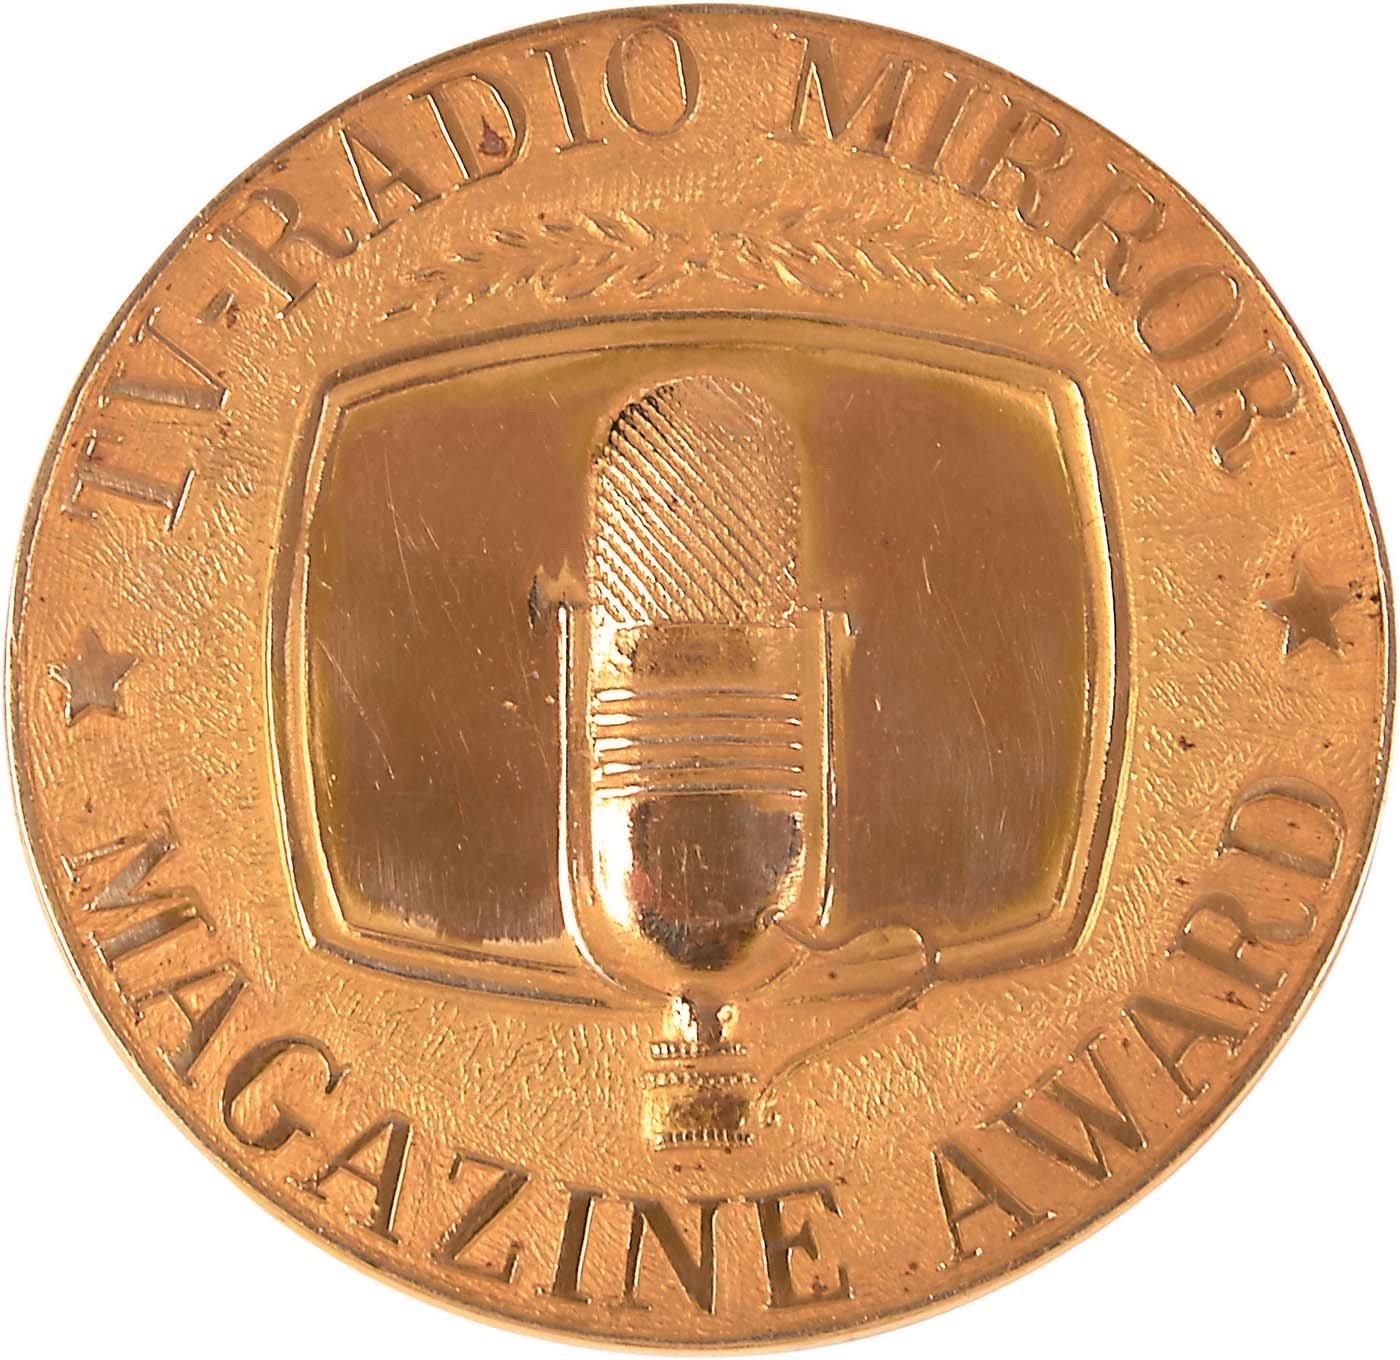 NY Yankees, Giants & Mets - 1954 TV-Radio Mirror Magazine 14k Gold Award Presented to Mel Allen - Displayed in National Museum of American Jewish History